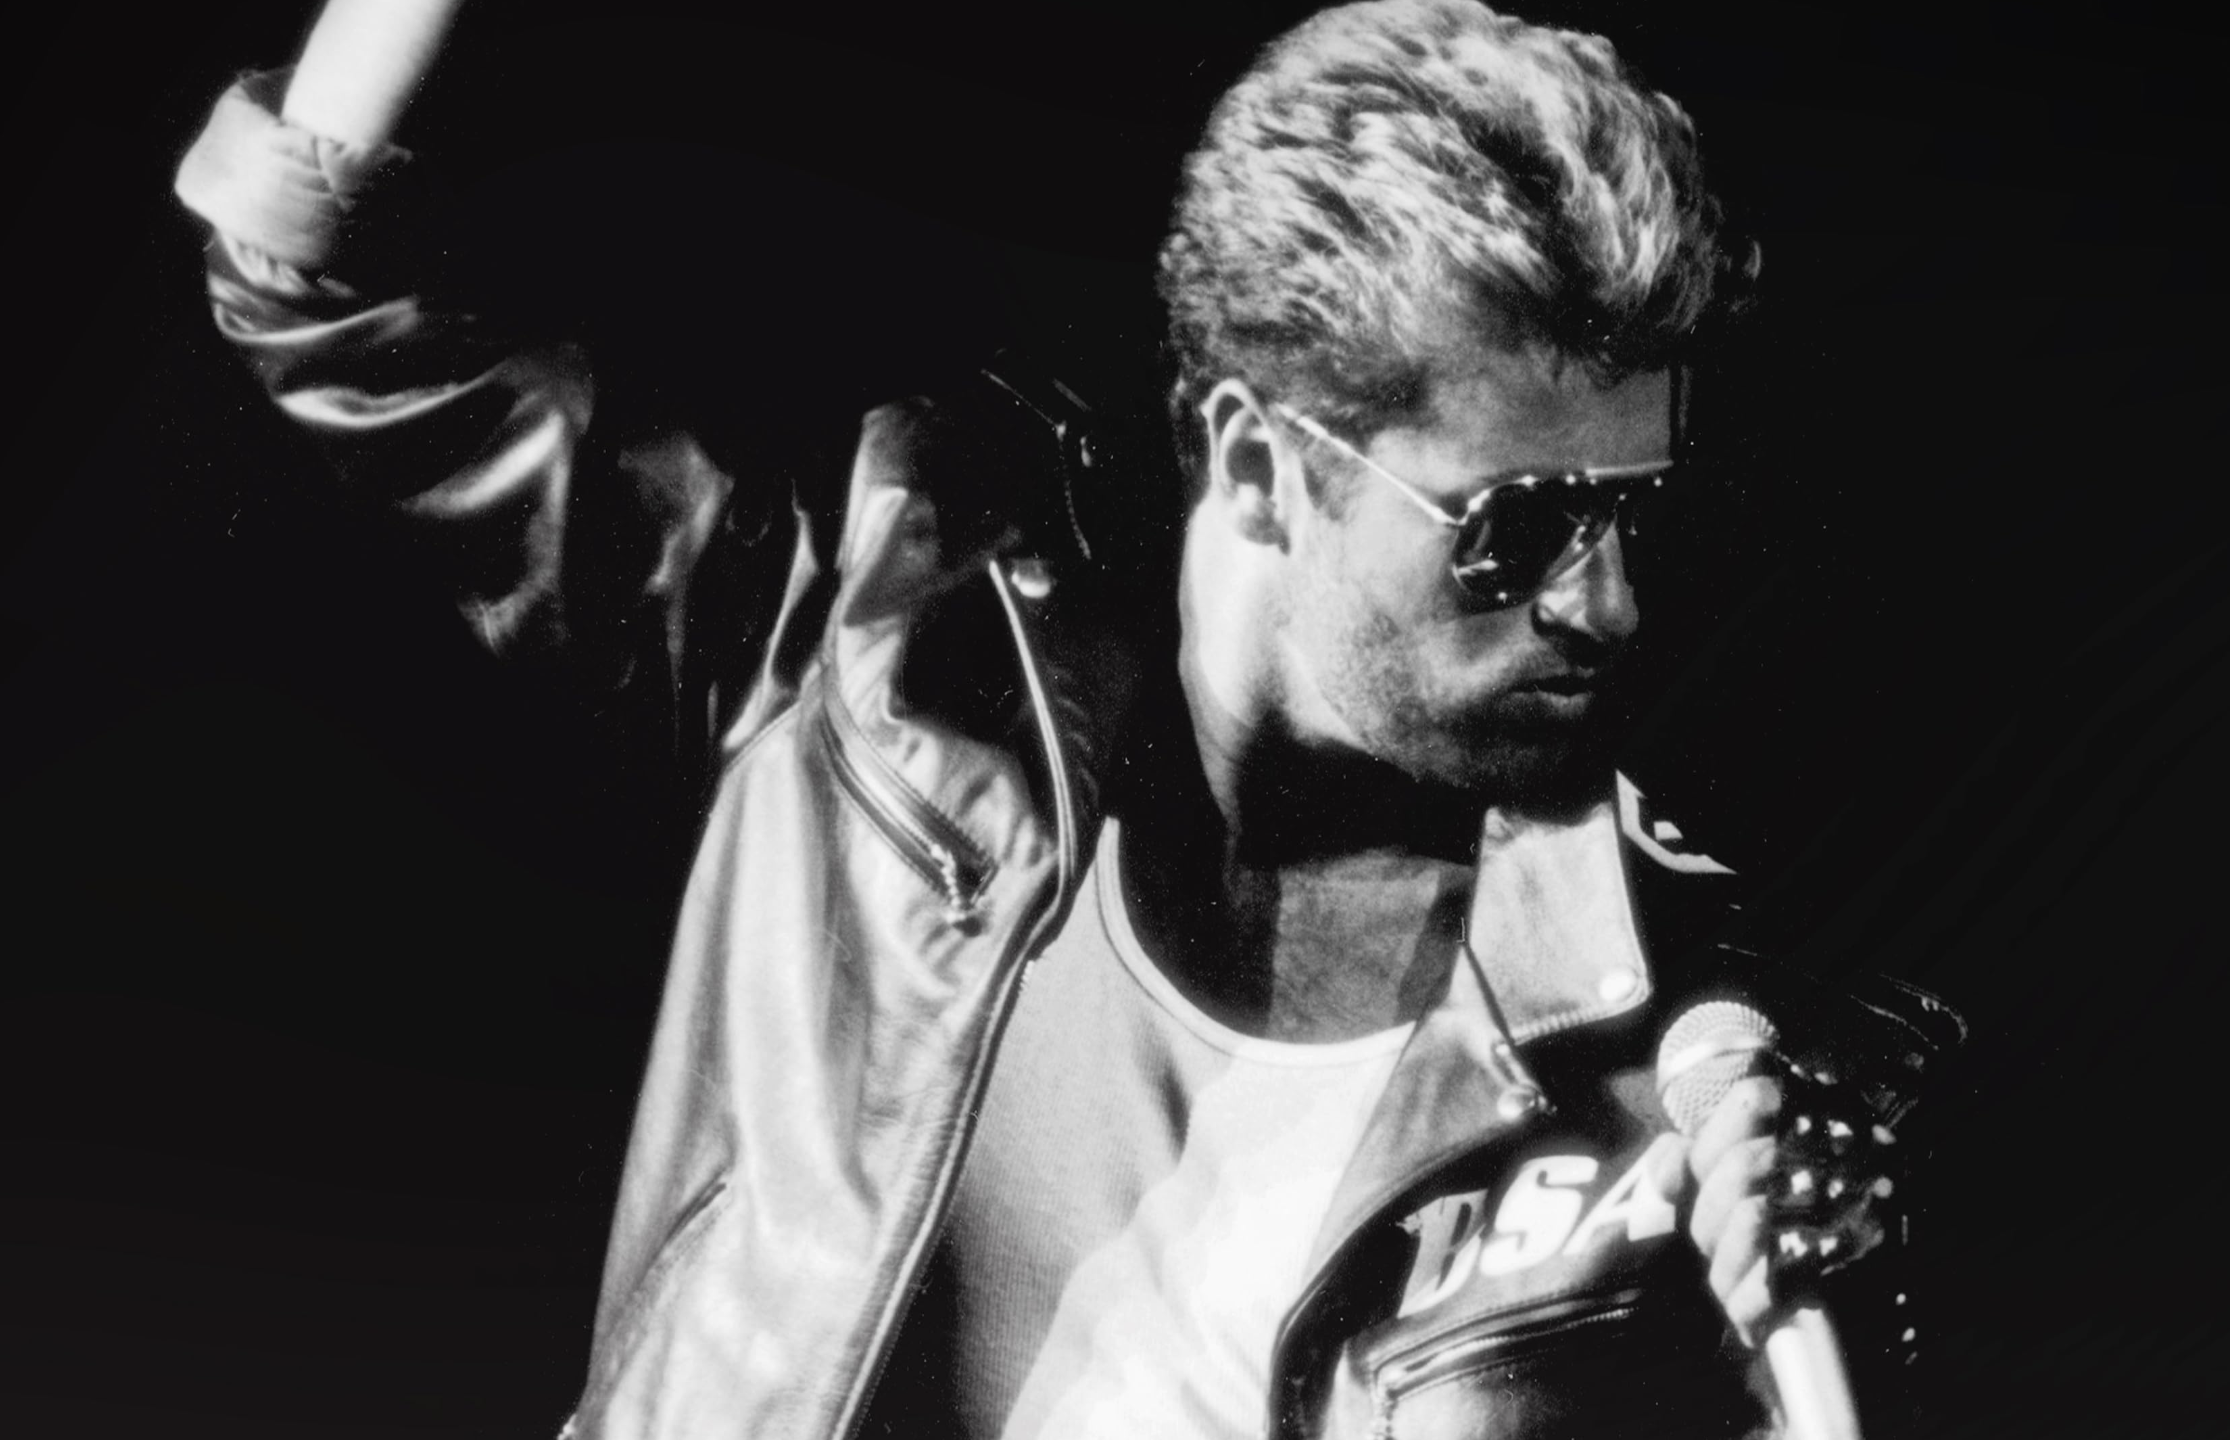 Black and white photograph of George Michael